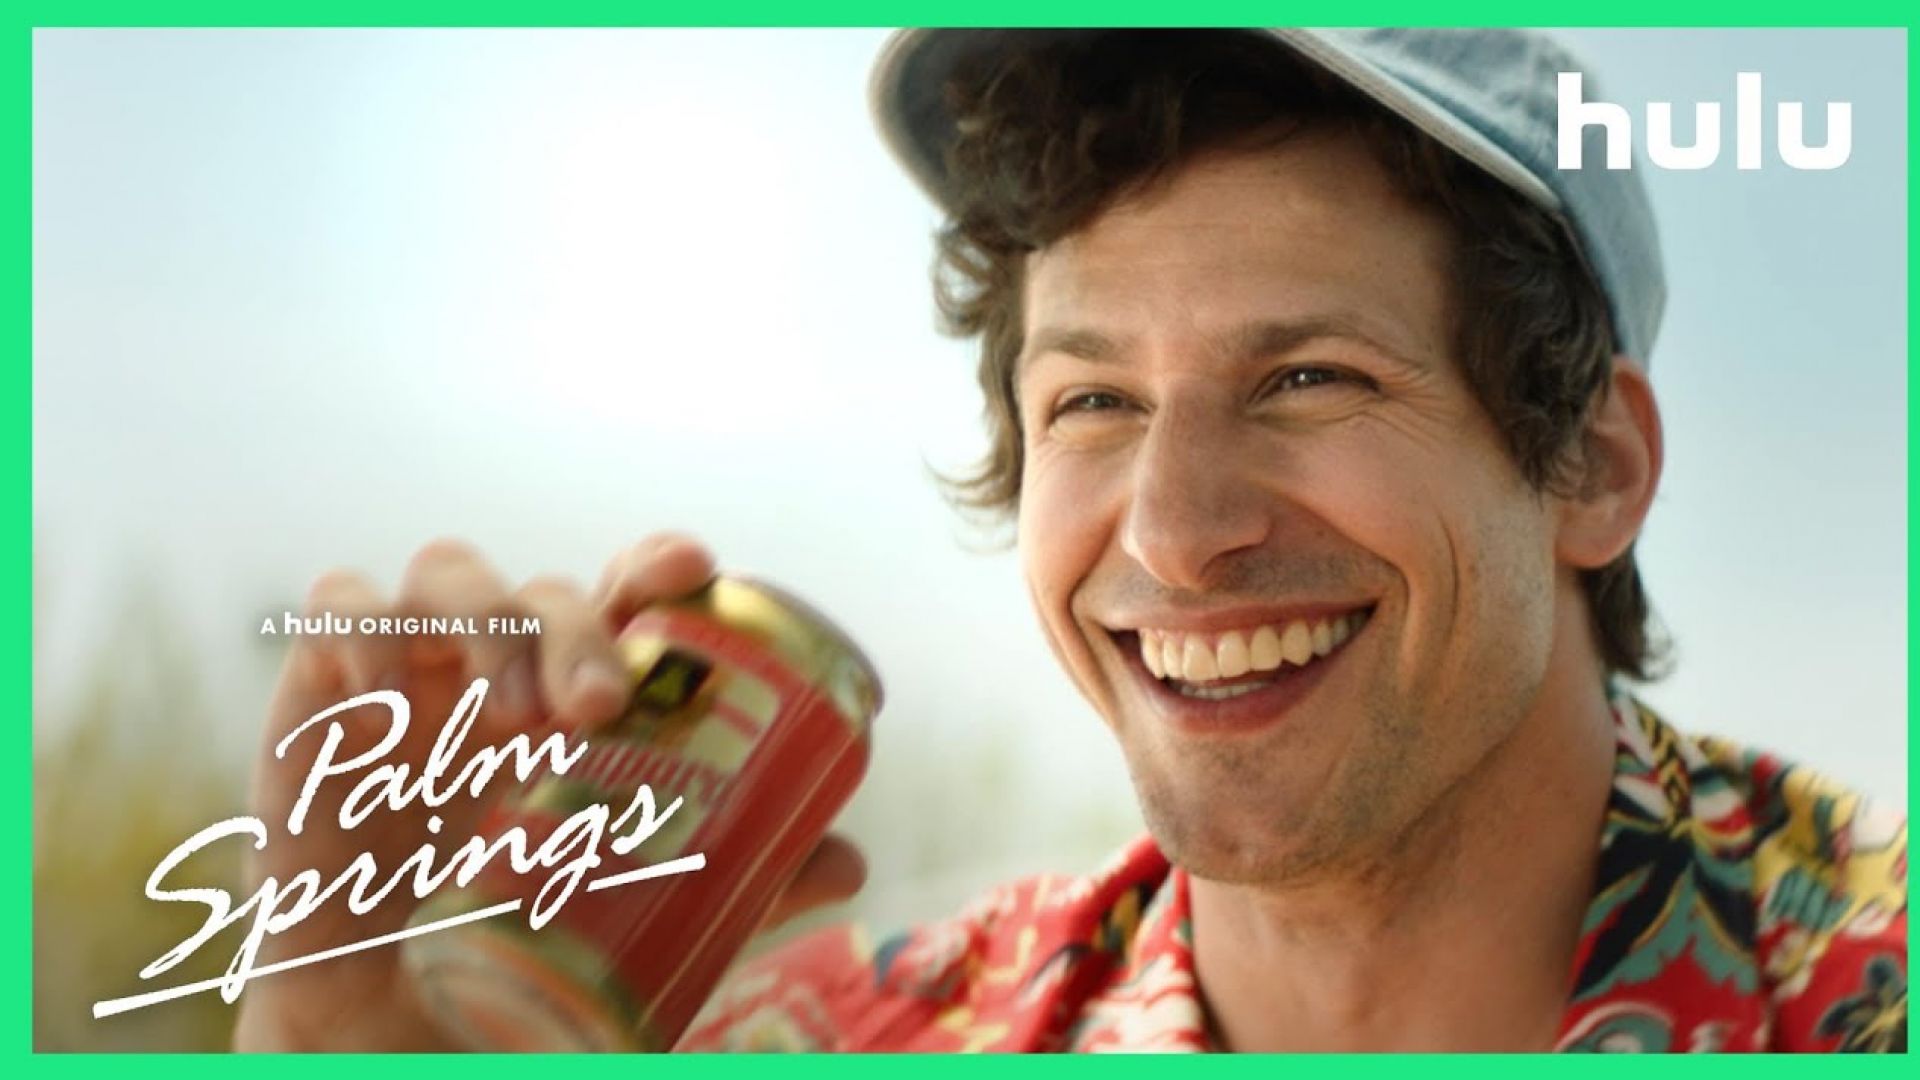 Trailer for Sundance hit &#039;Palm Springs&#039; with Andy Samberg